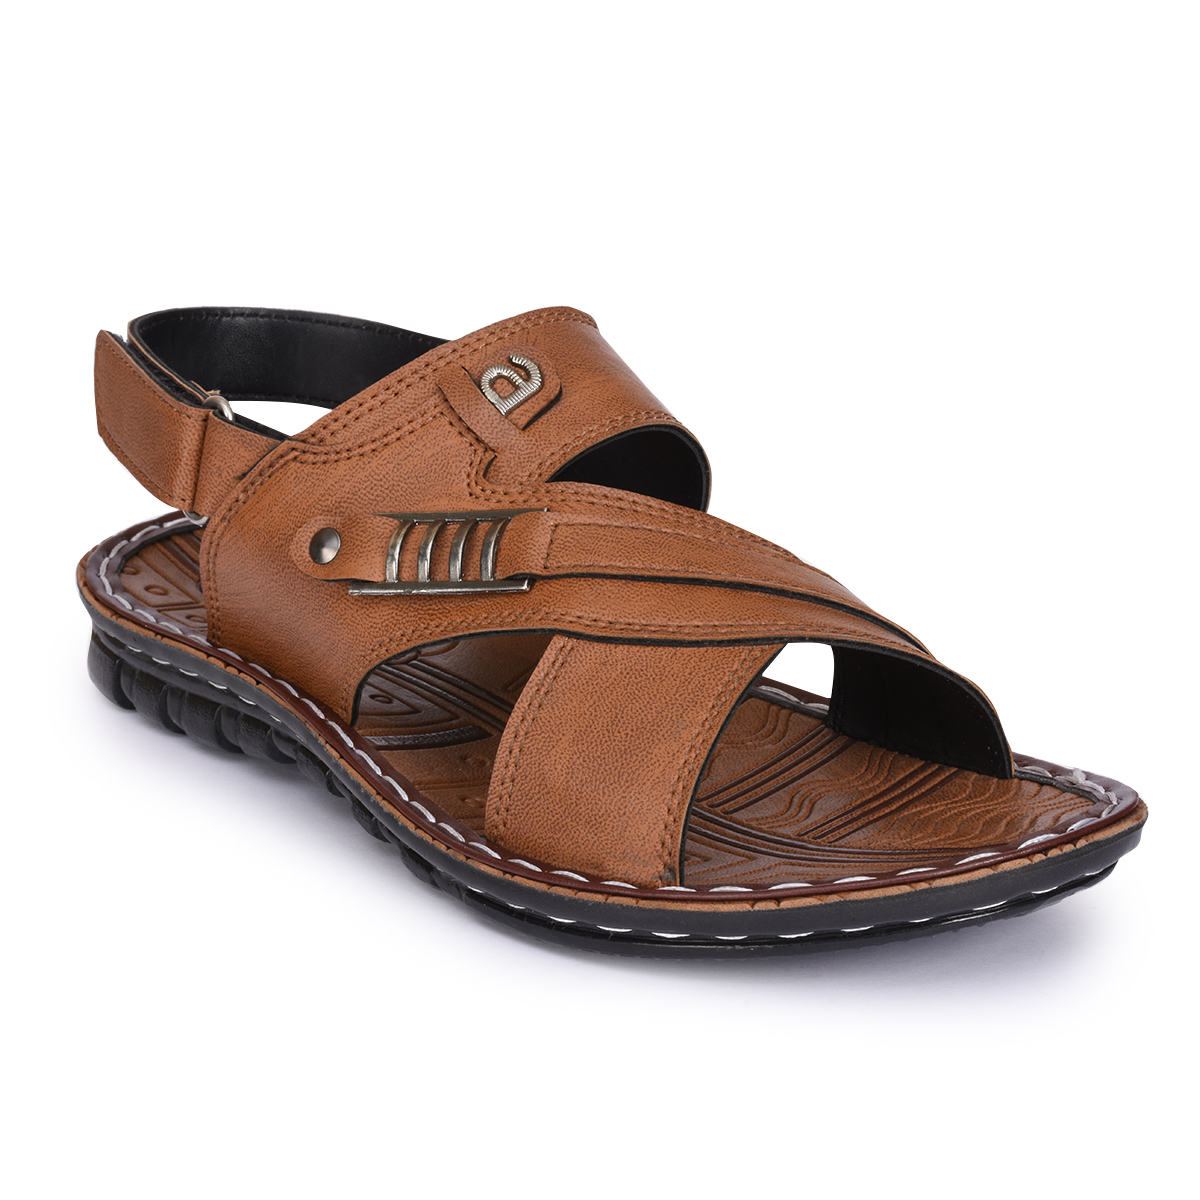 Buy Action Shoes Tan Velcro Sandals Online @ ₹349 from ShopClues